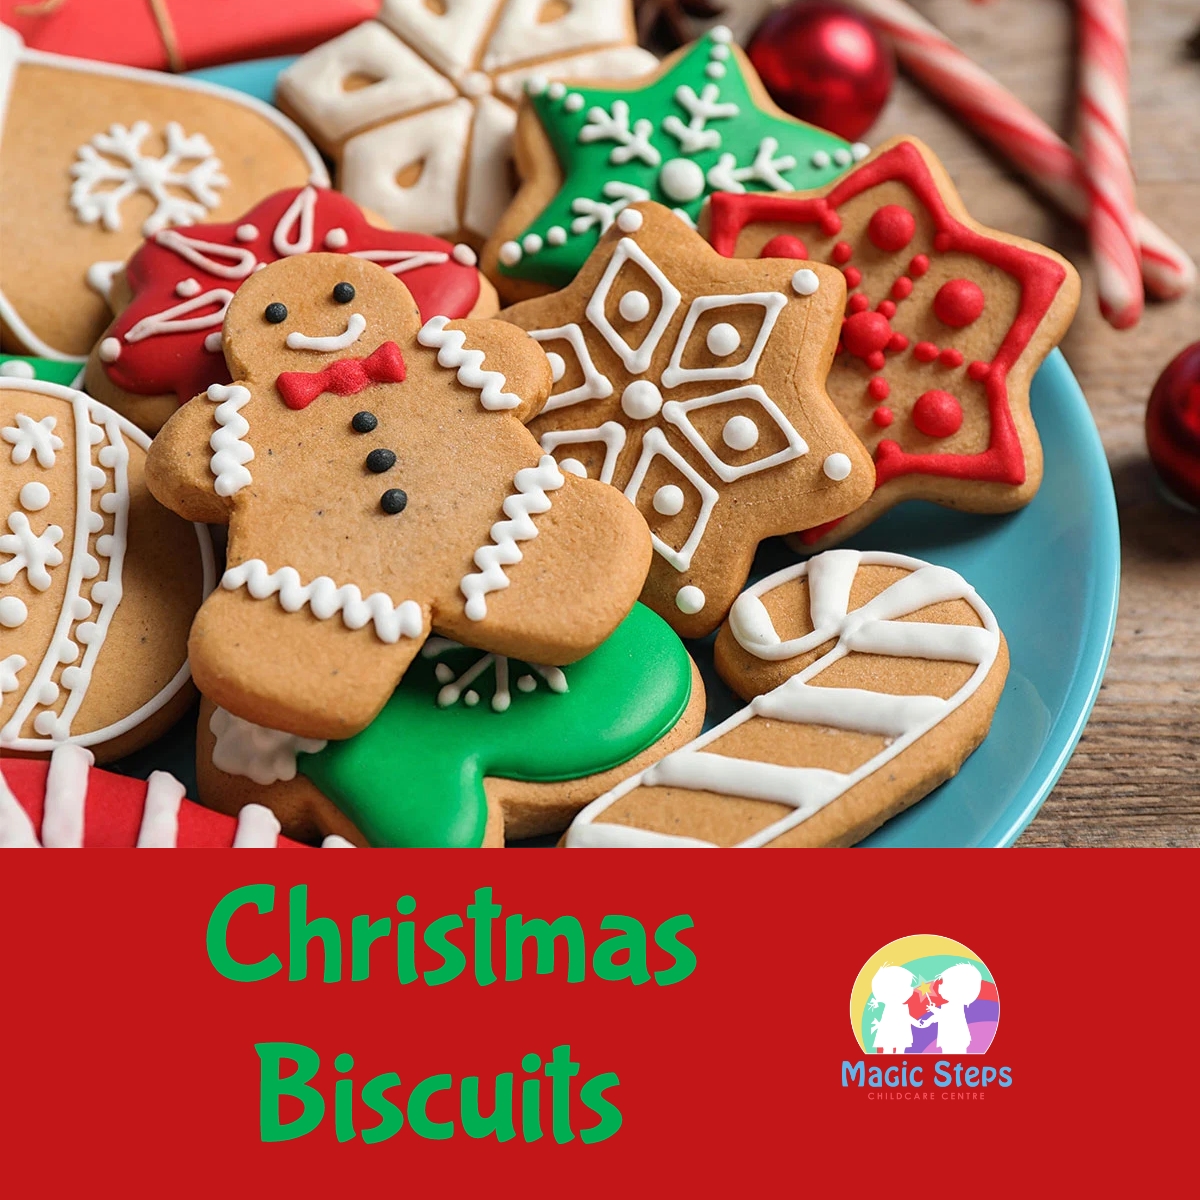 Christmas Cookies- Tuesday 7th December